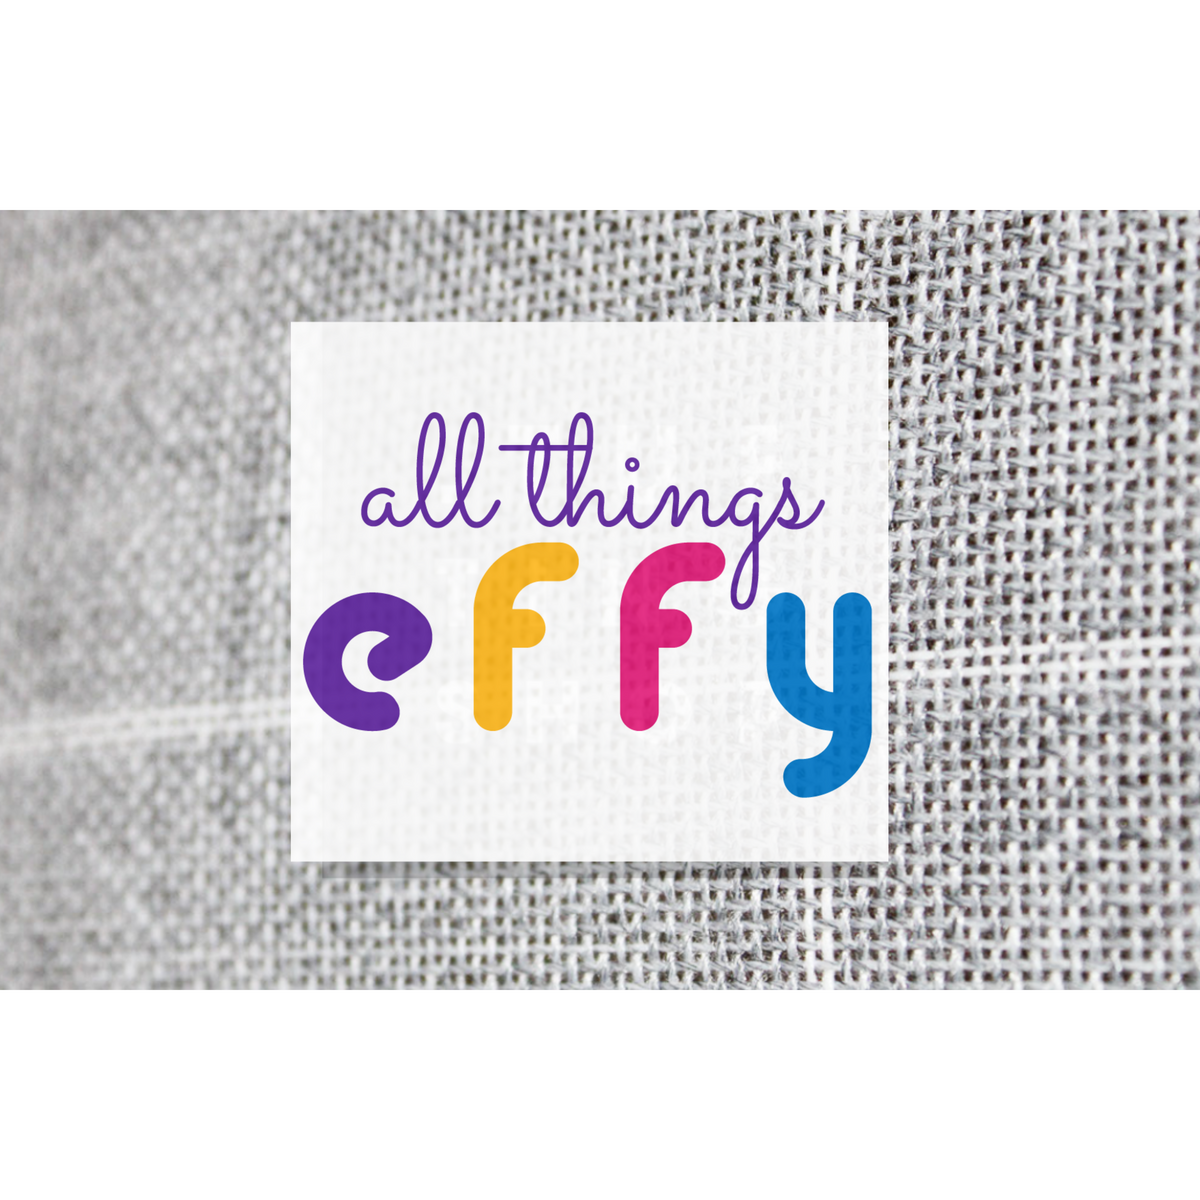 Primary Tufting Cloth - Gray